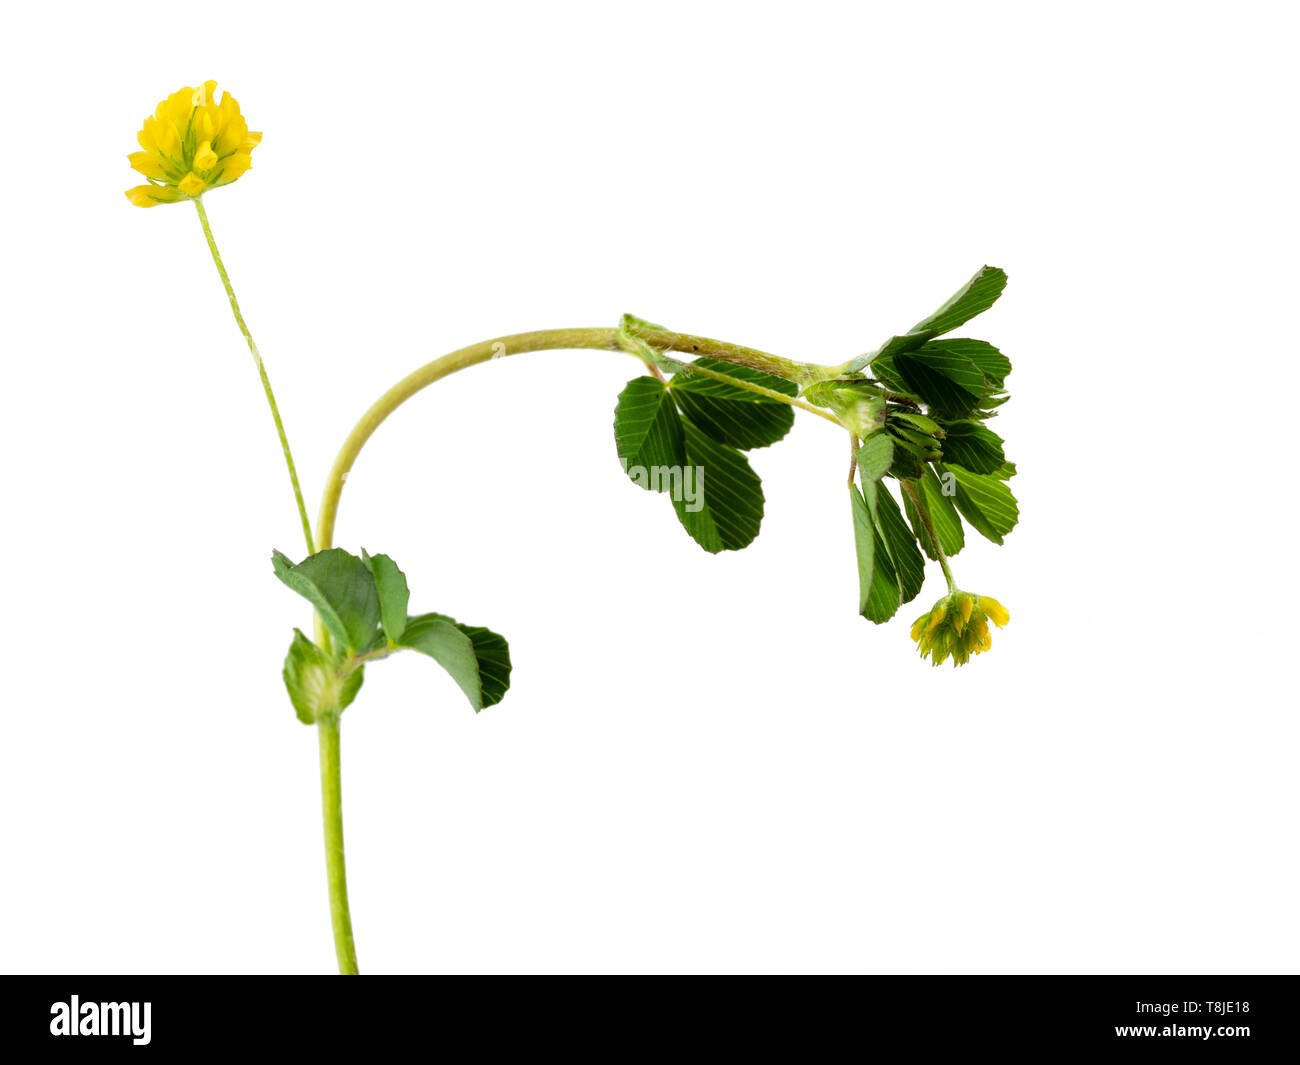 Small heads of yellow flowers and clover like leaves of the annual or biennial black Madick, Medicago lupulina, on a white background Stock Photo